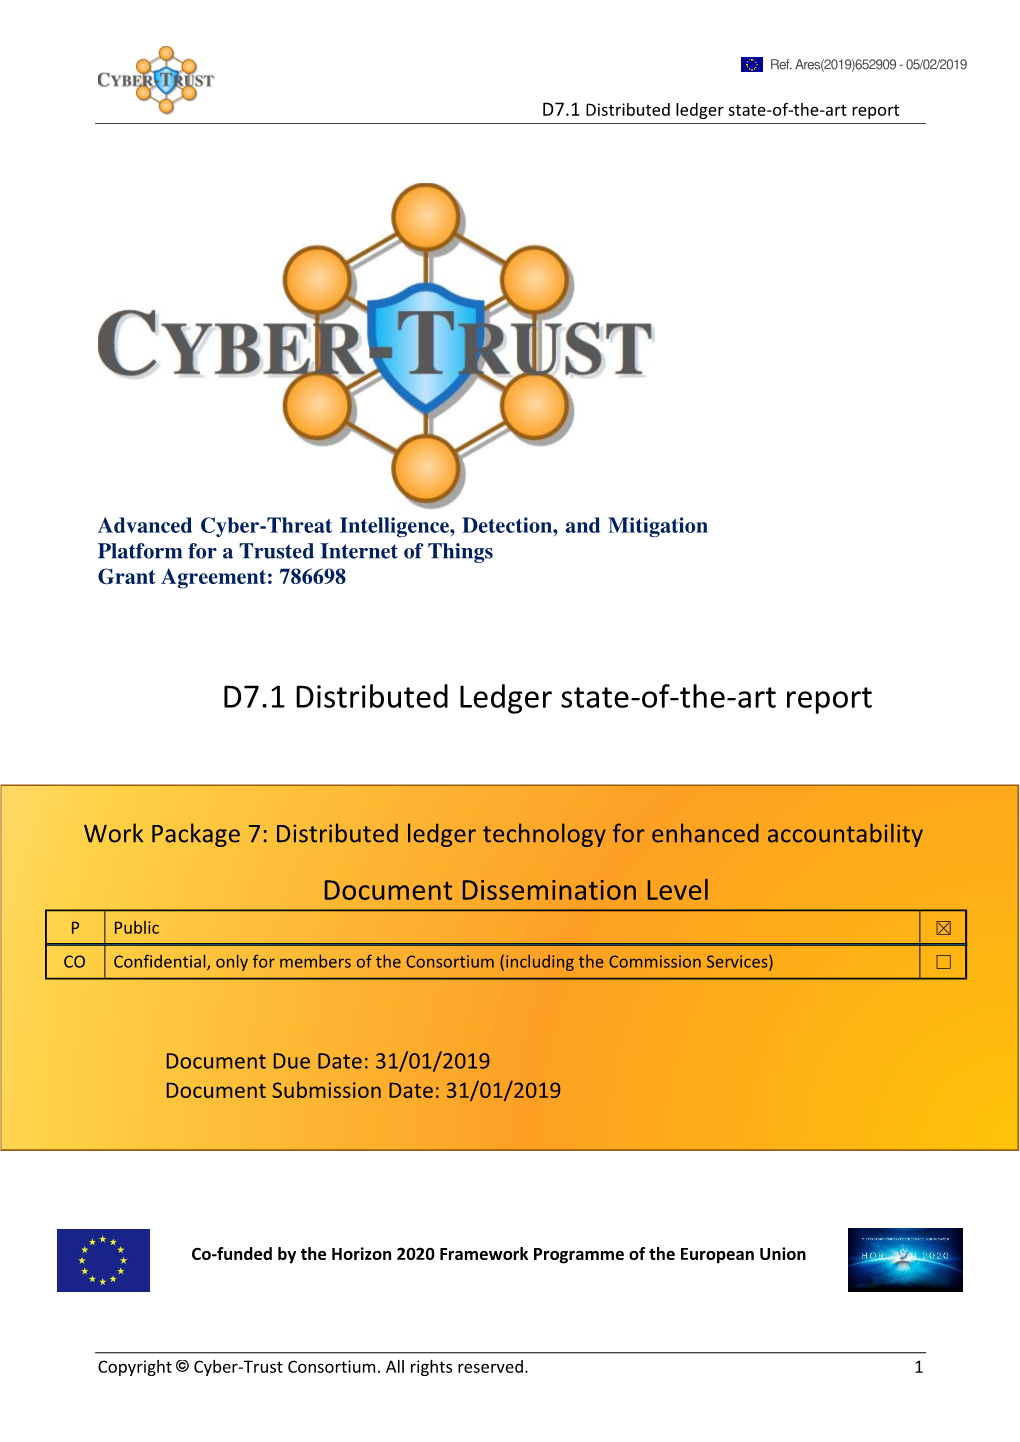 D7.1 Distributed Ledger State-Of-The-Art Report